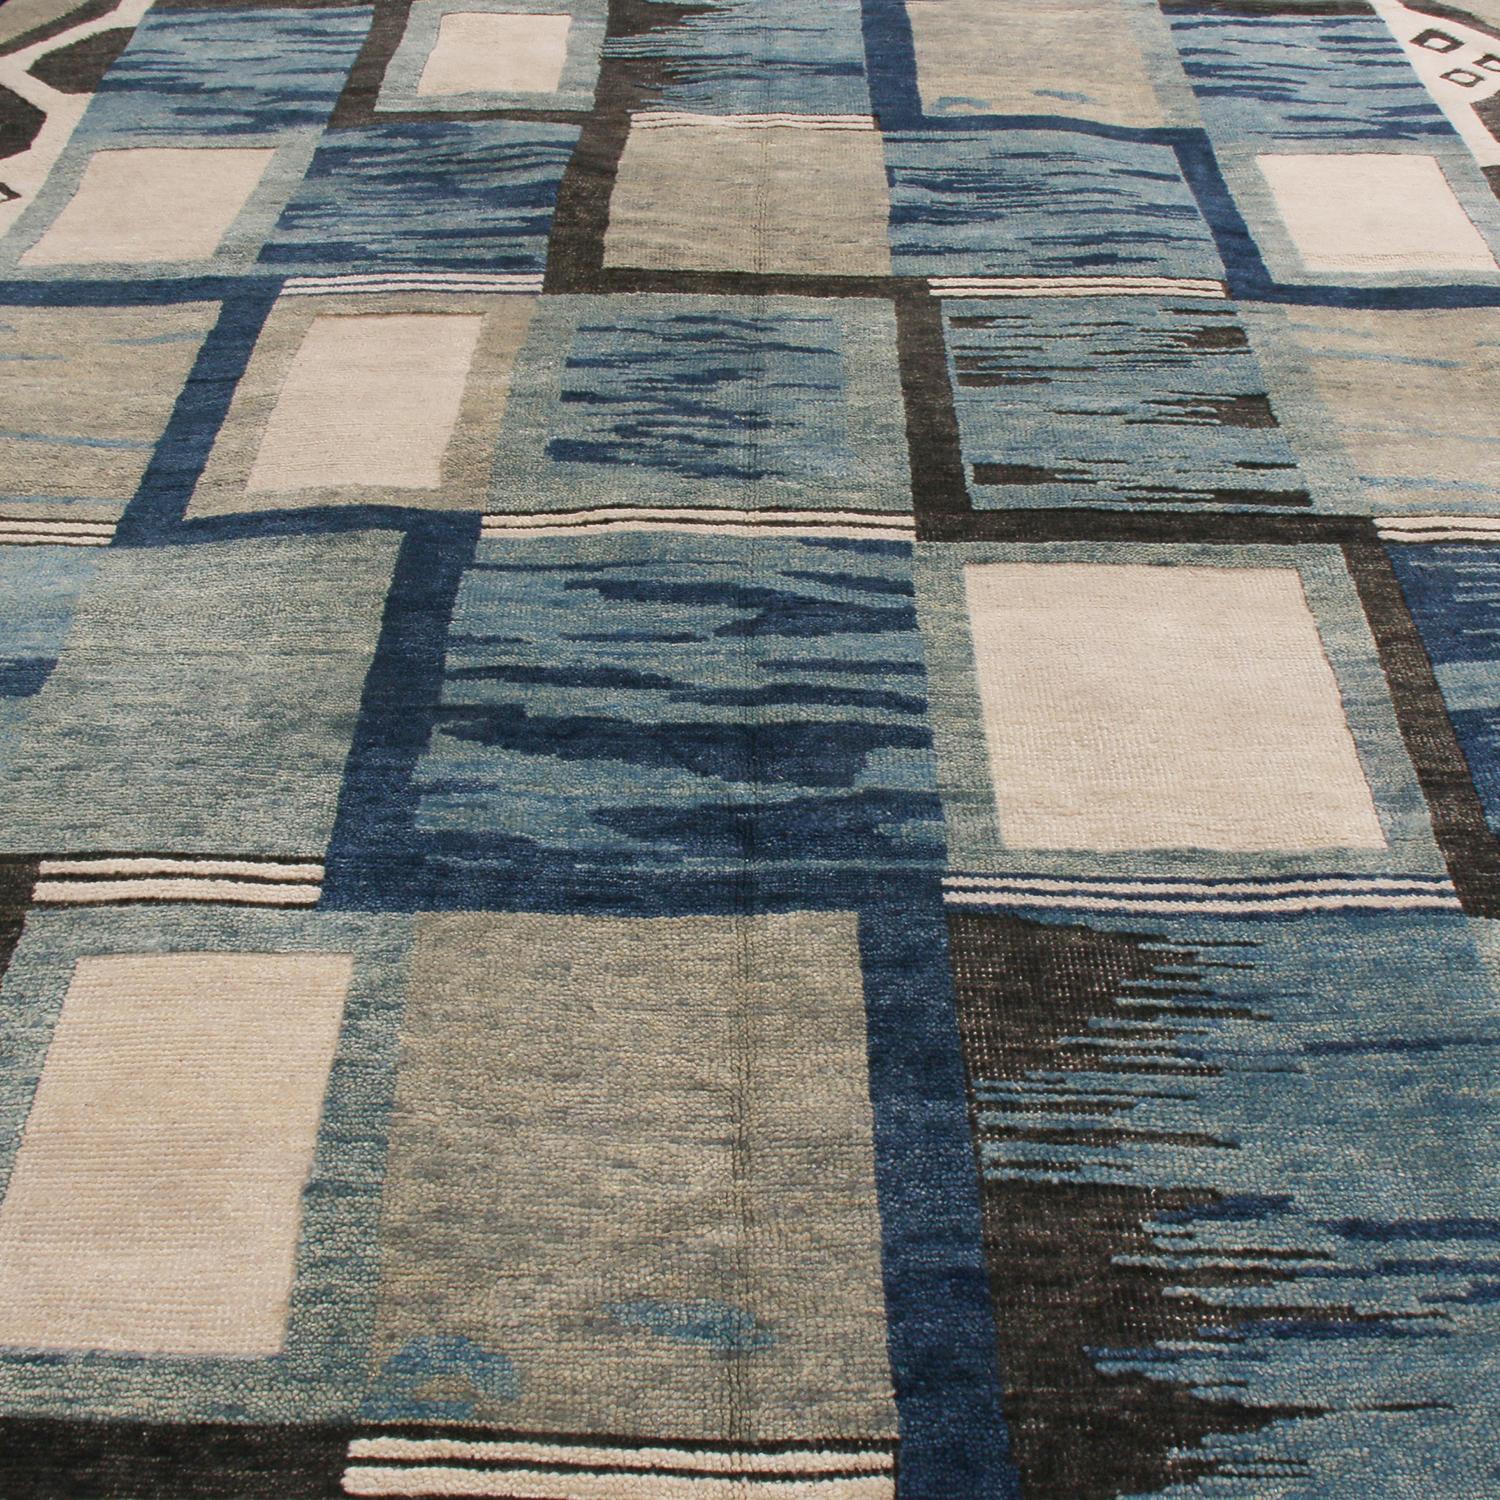 Originating from India, this hand knotted contemporary pile rug hails from Rug & Kilim’s Scandinavian-inspired collection, featuring a distinct tribal geometric all-over field design with bold black, off-white, gray, and multi-tonal blue colorways;